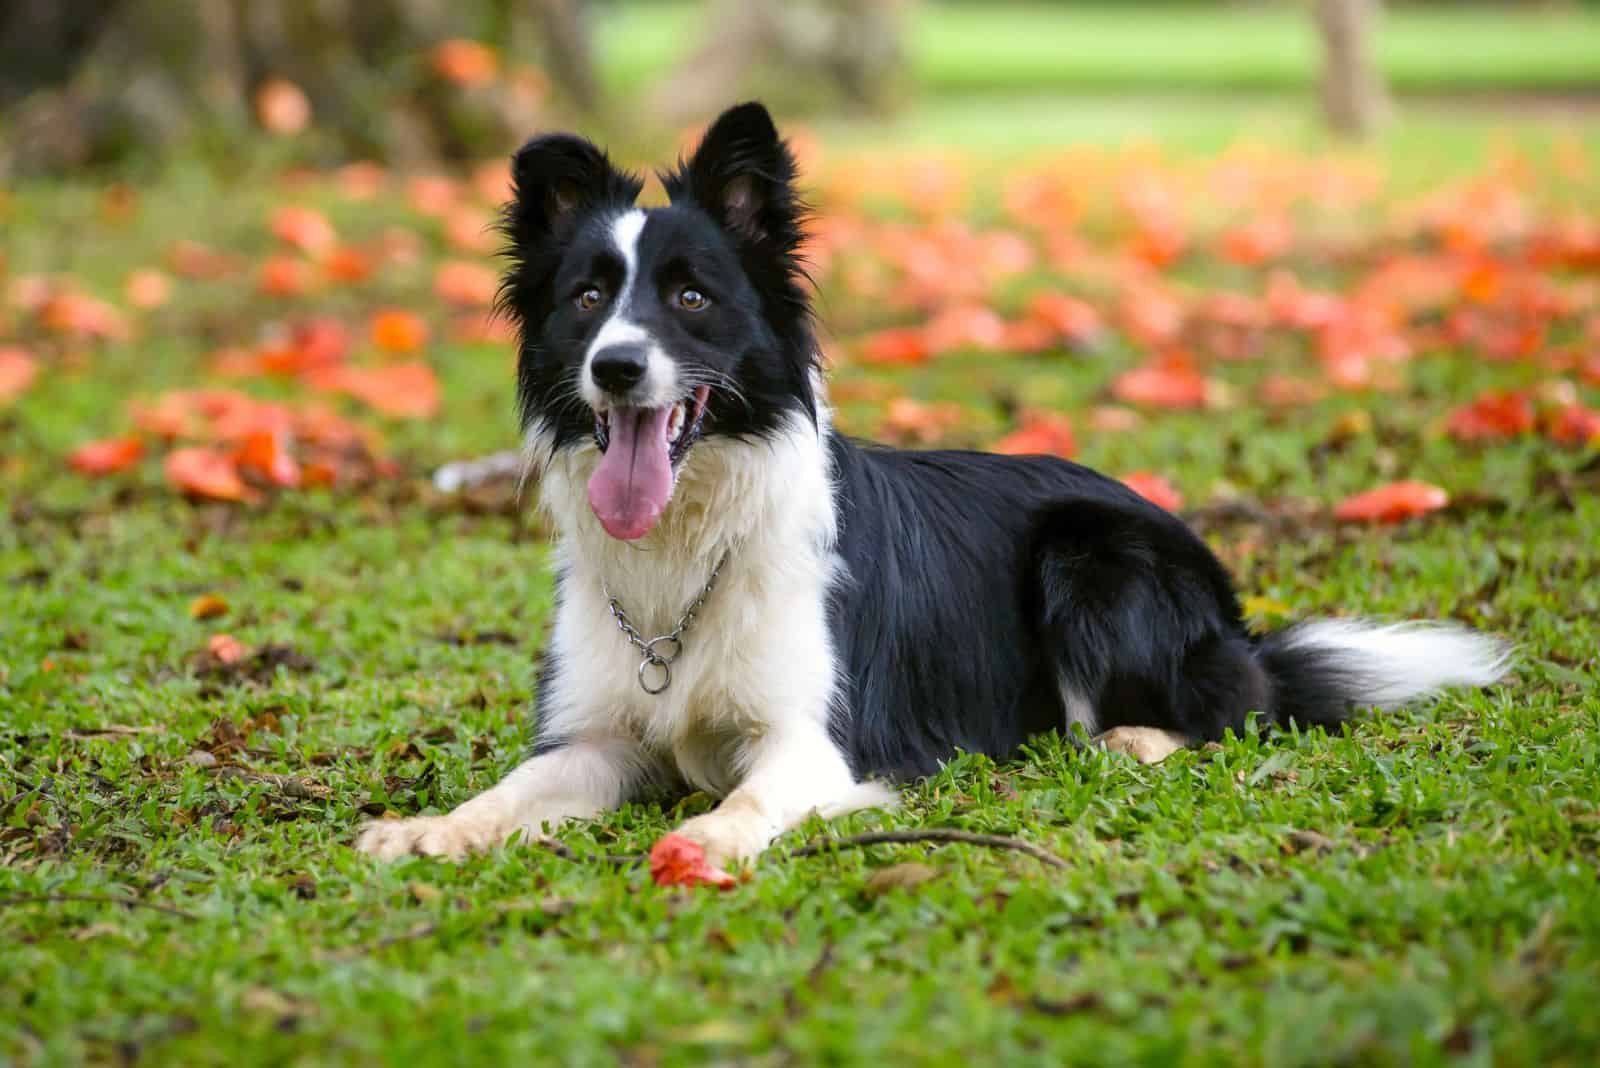 A border collie lies on the grass with his tongue out